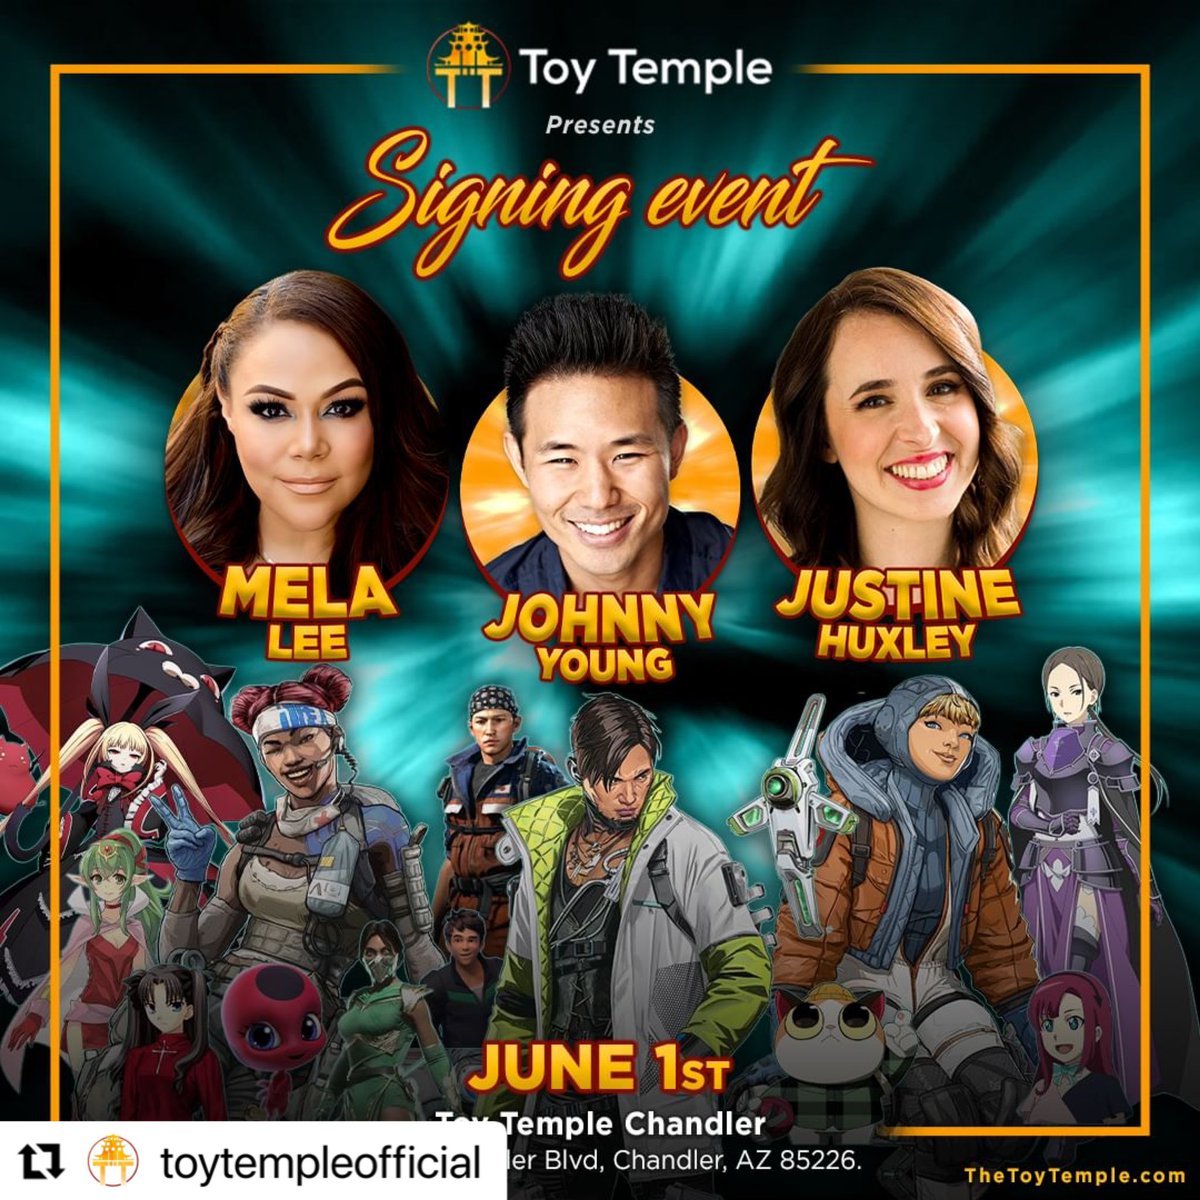 Wassup Arizona ! We’re making it out to @ToyTempleAz with @TheMelaLee & @JustineHuxley for a signing event in Chandler, Arizona (Phoenix area) it’s party time 🥳 Sat., June 1 from 11am - 3pm. Tix: tixr.com/groups/toytemp… #ApexLegends #Lifeline #Crypto #Wattson